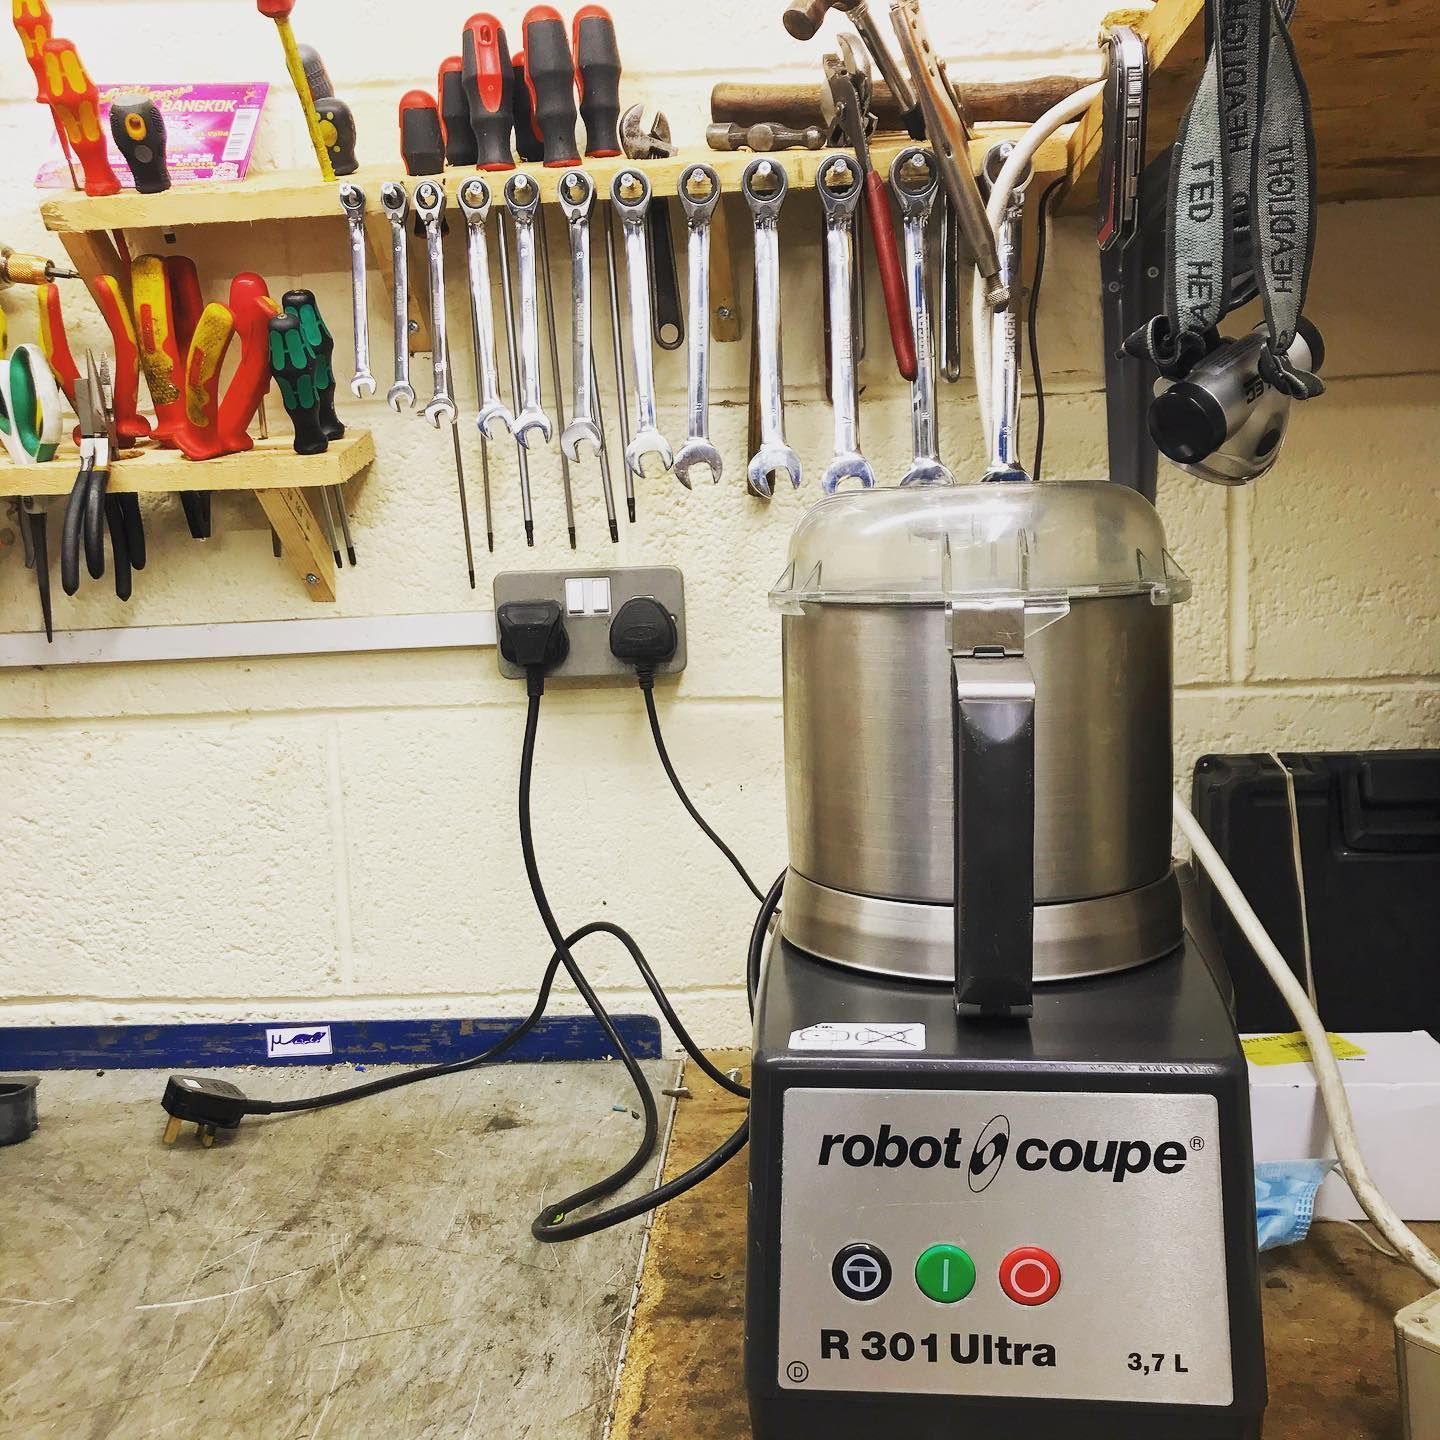 a robot coupe r301 ultra sits on repair workstation